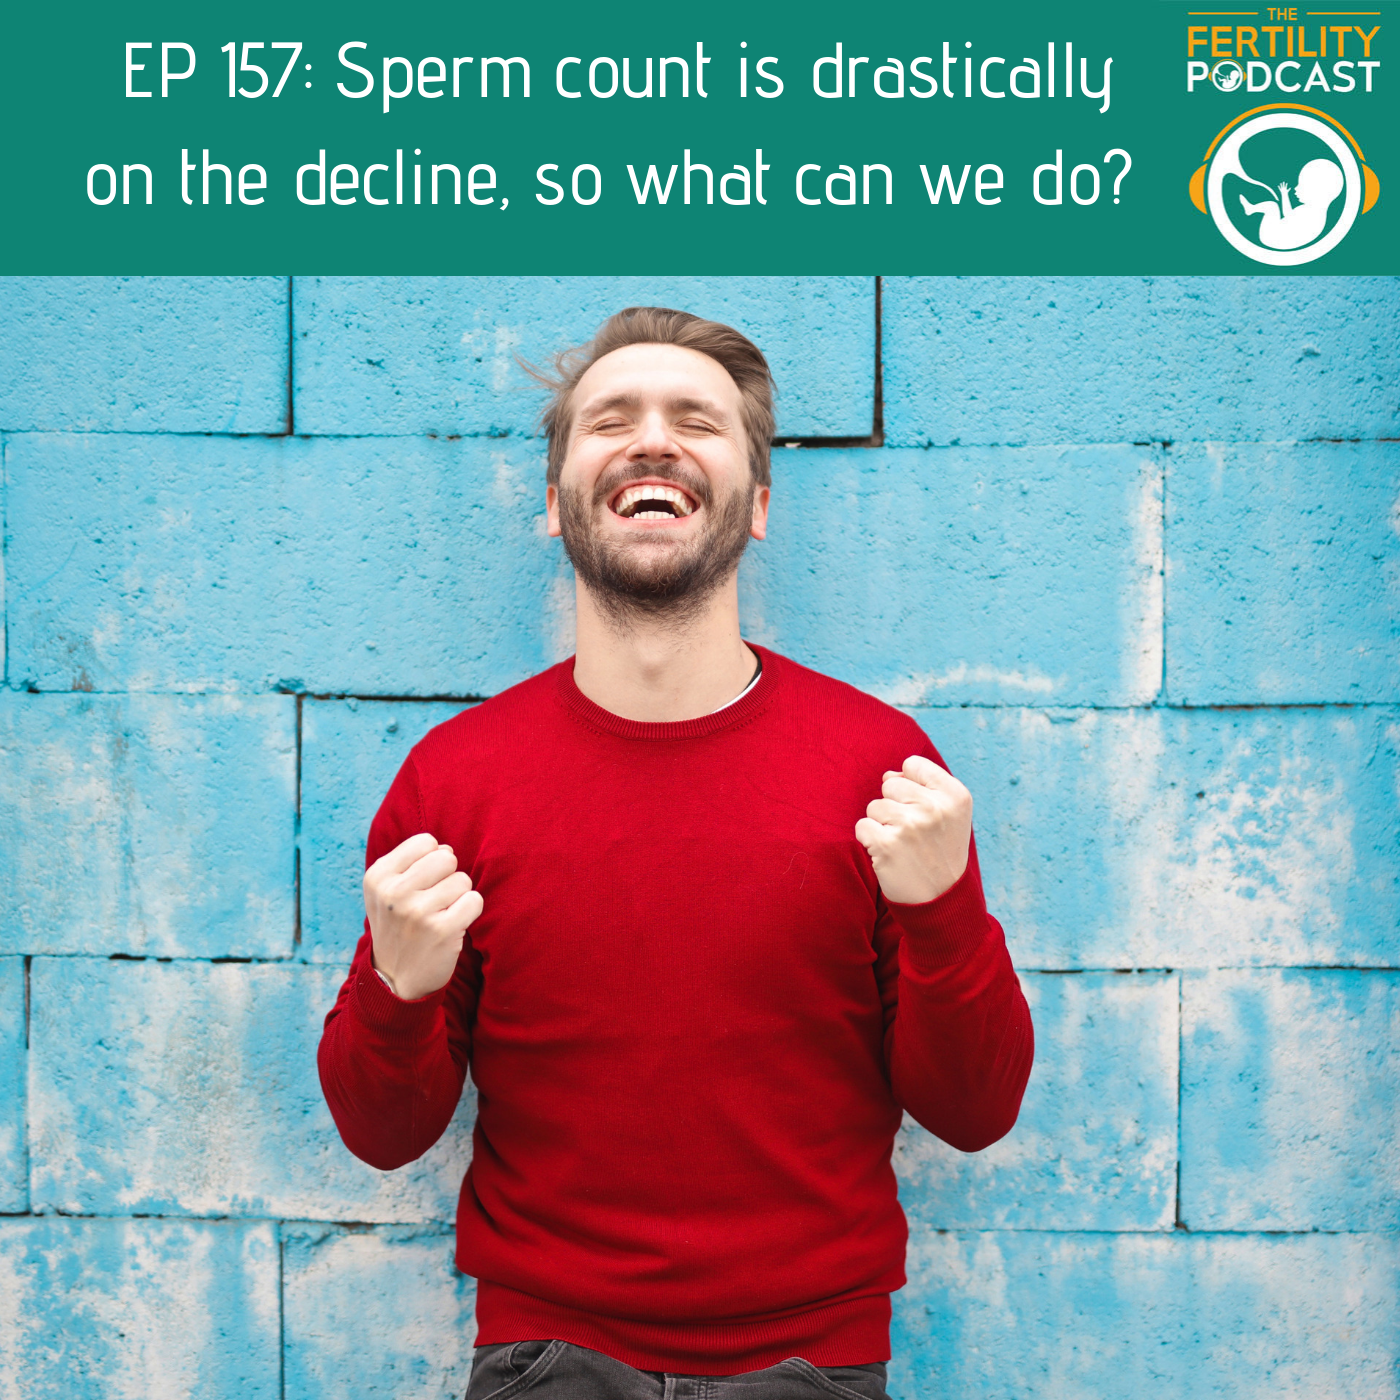 Are sperm counts declining?